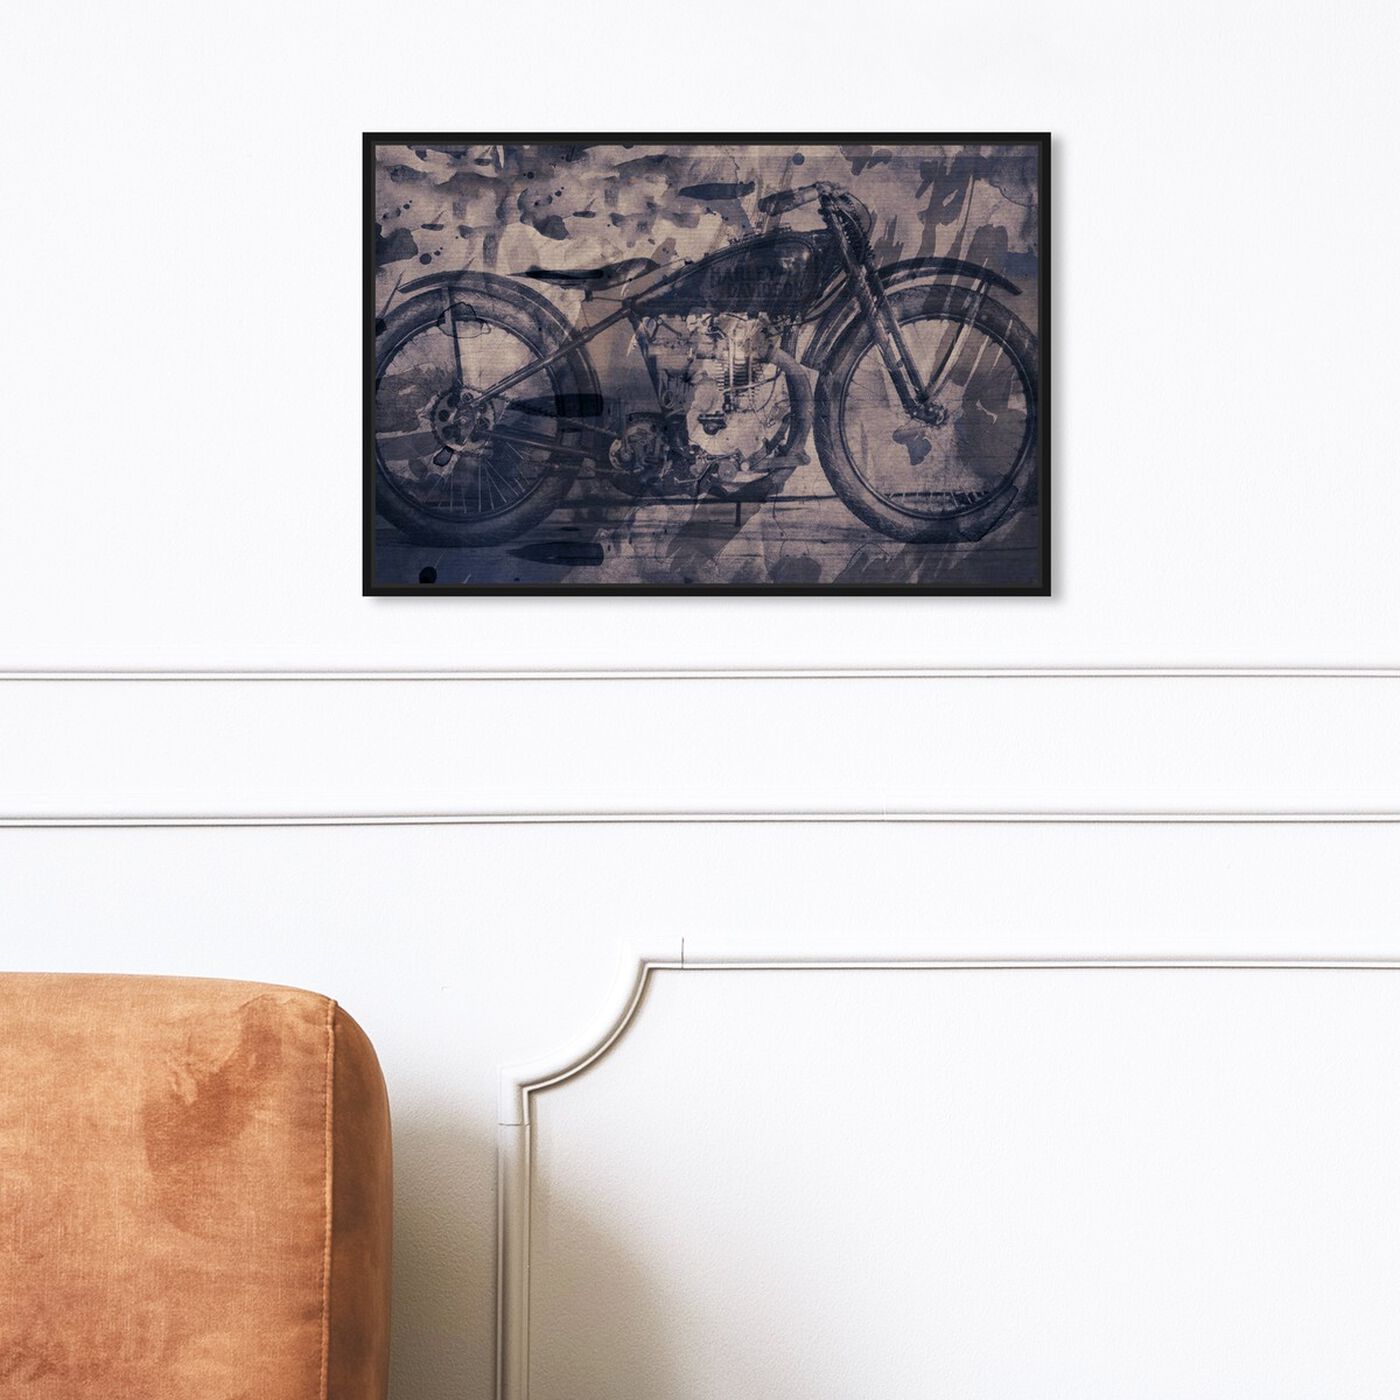 Hanging view of Vintage Bike featuring transportation and motorcycles art.